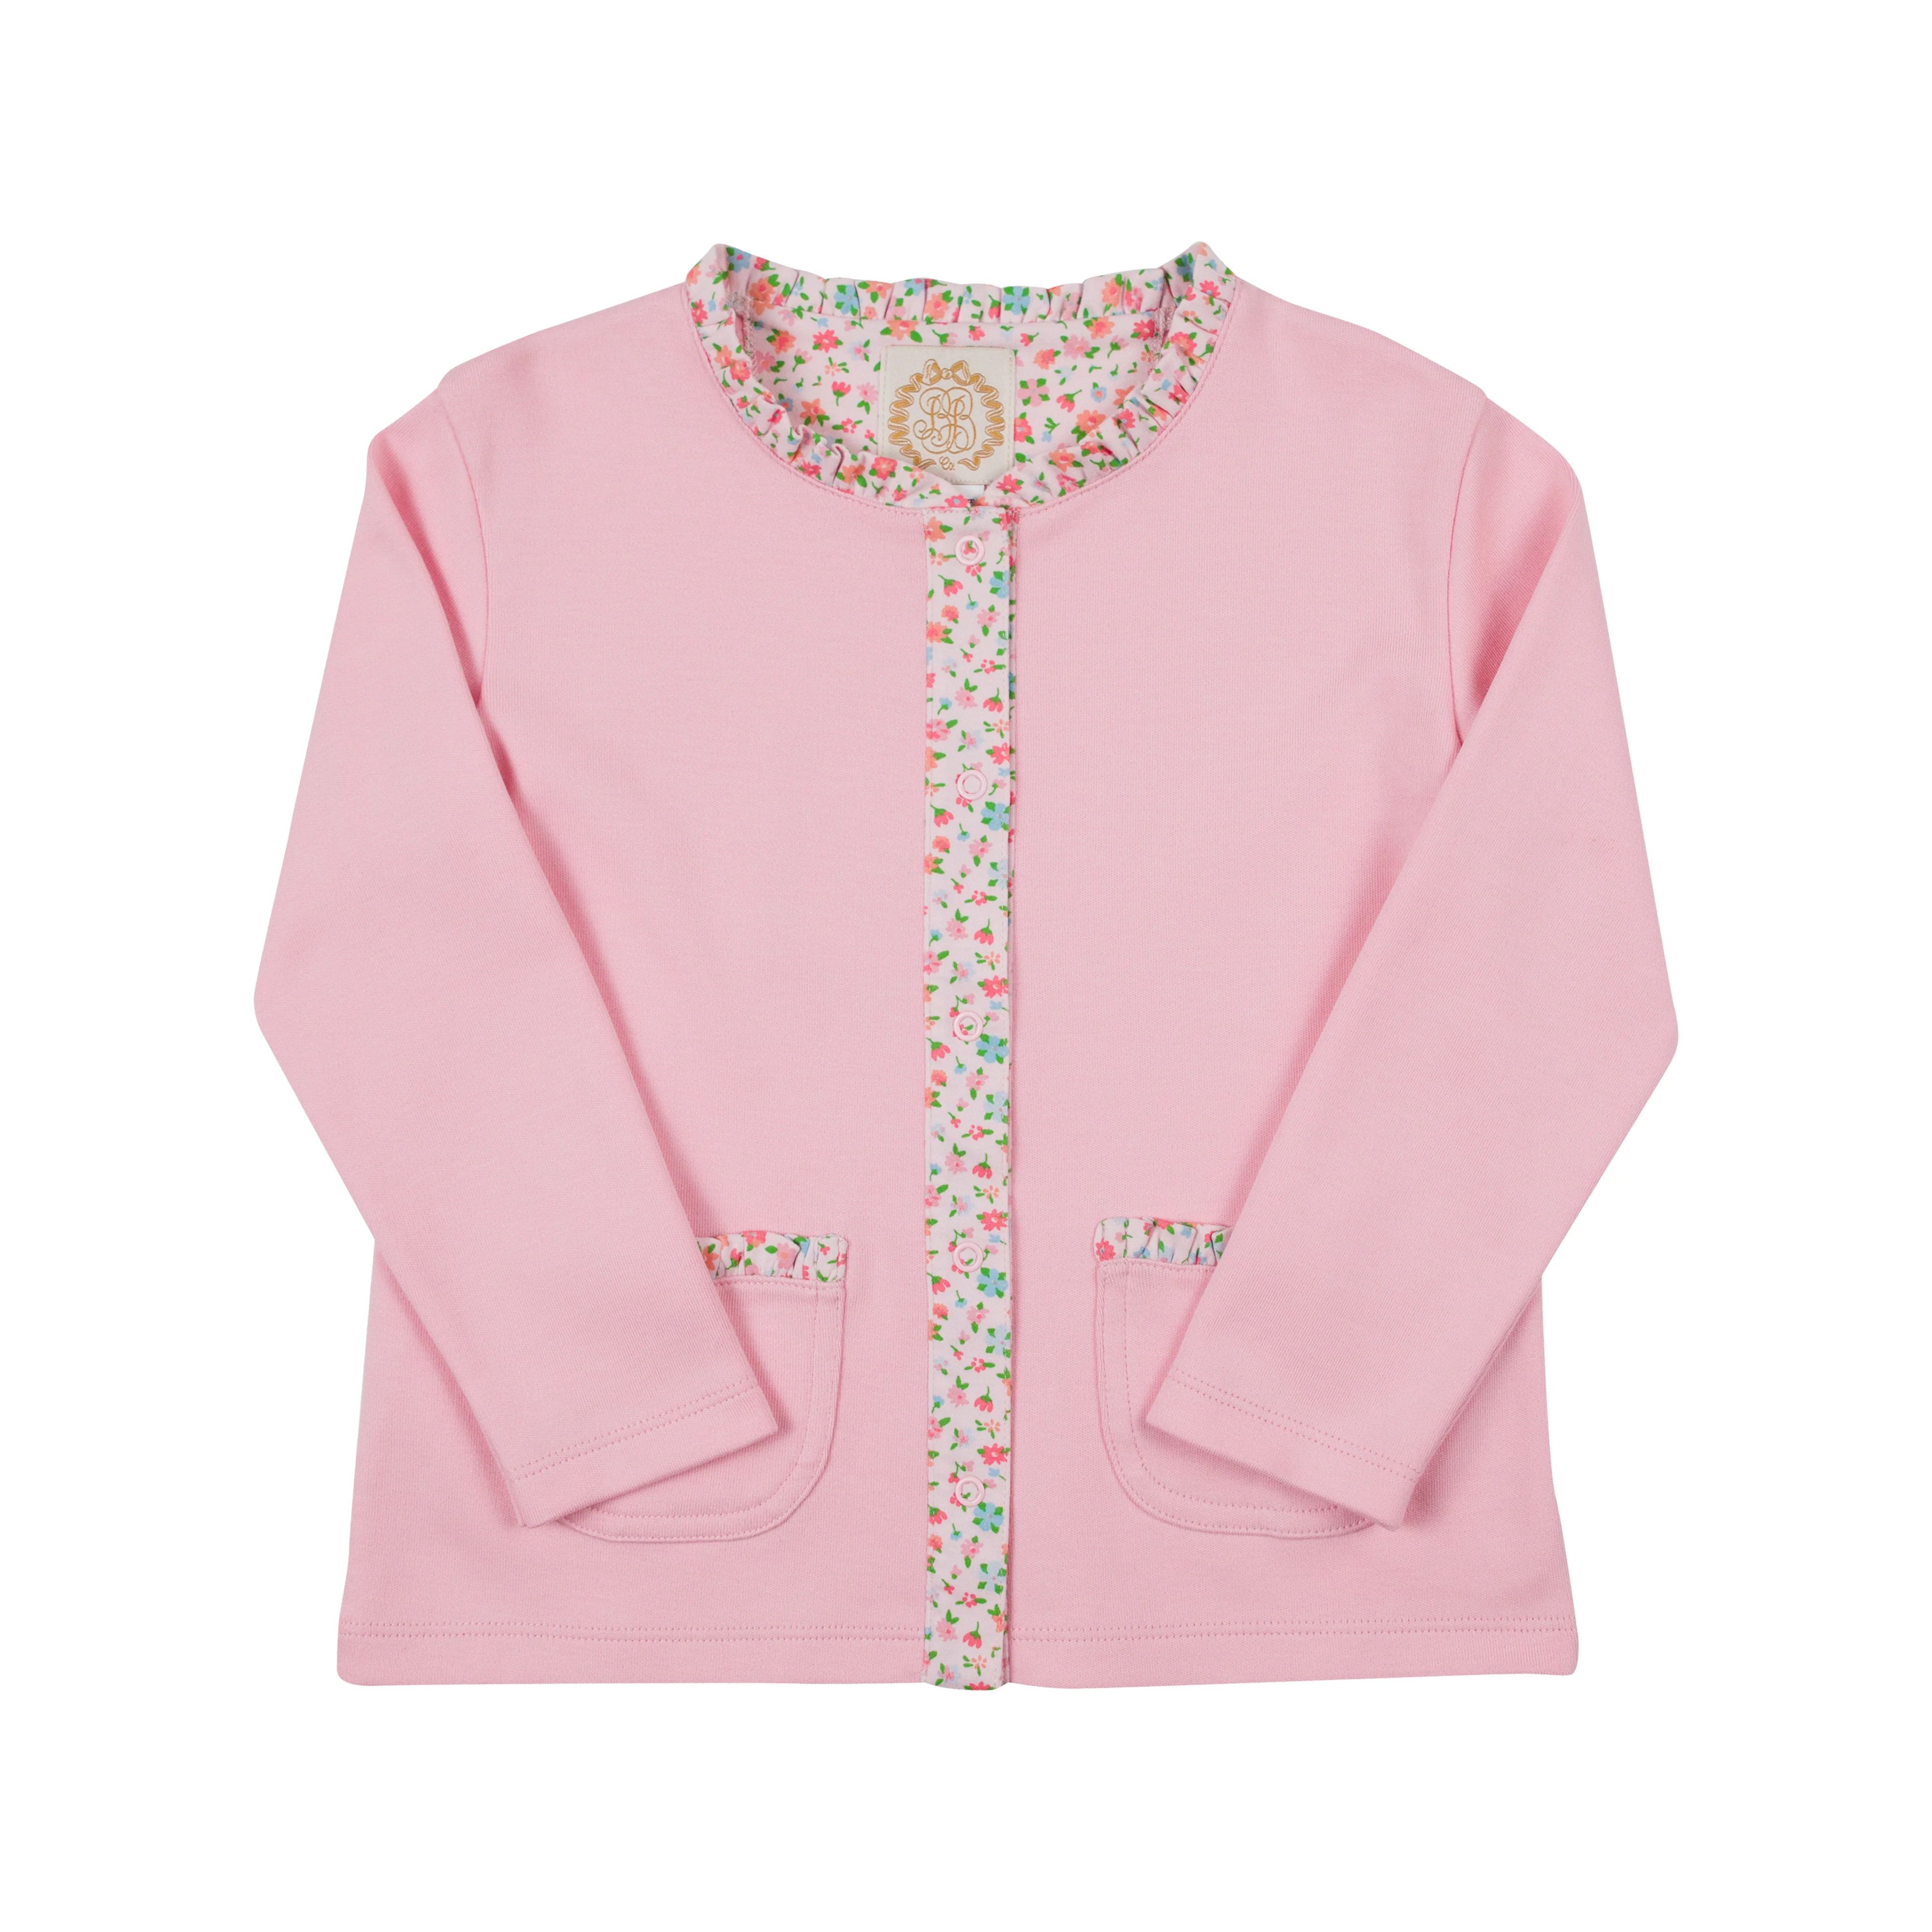 Lizzie's Luxe Leisure Cardigan - Sandpearl Pink with Fall Fest Floral | The Beaufort Bonnet Company